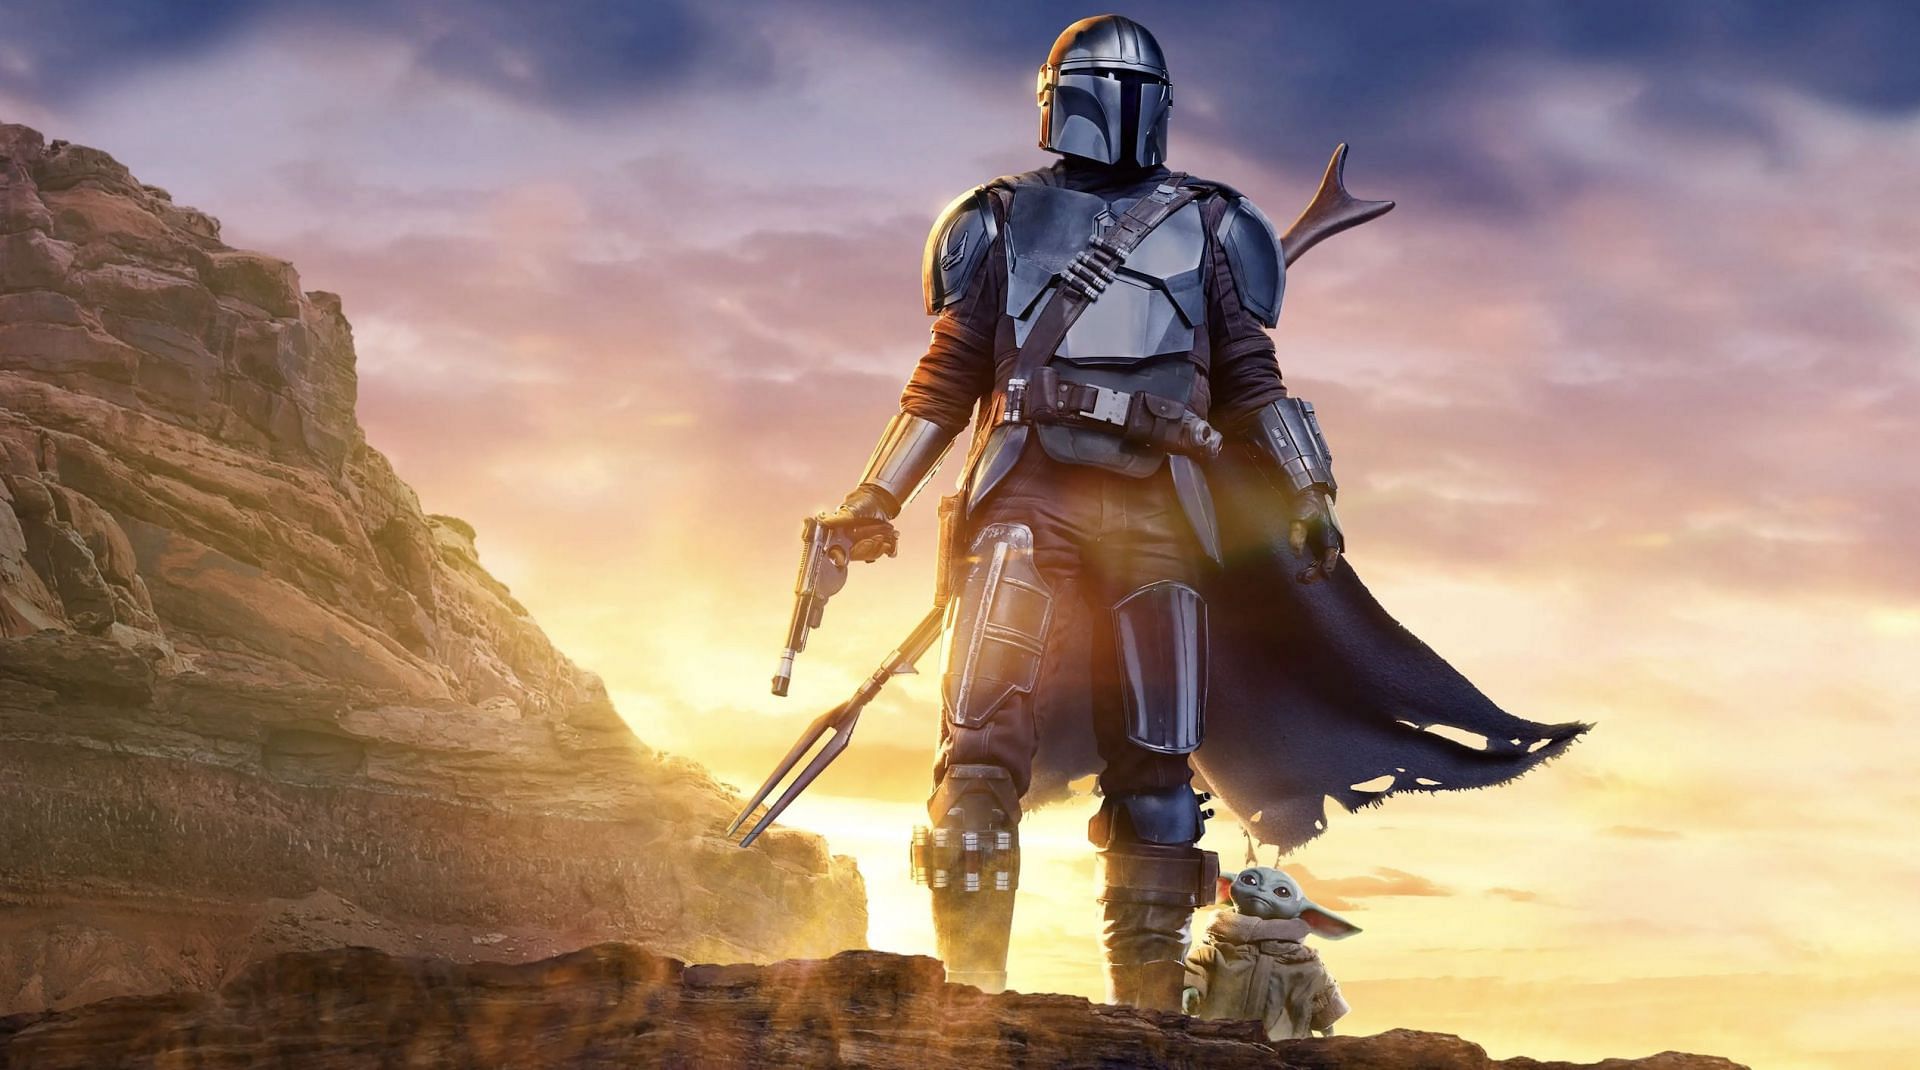 The epic journey continues: A sneak peek into the things one can expect from the third season of The Mandalorian (Image via Lucasfilm)